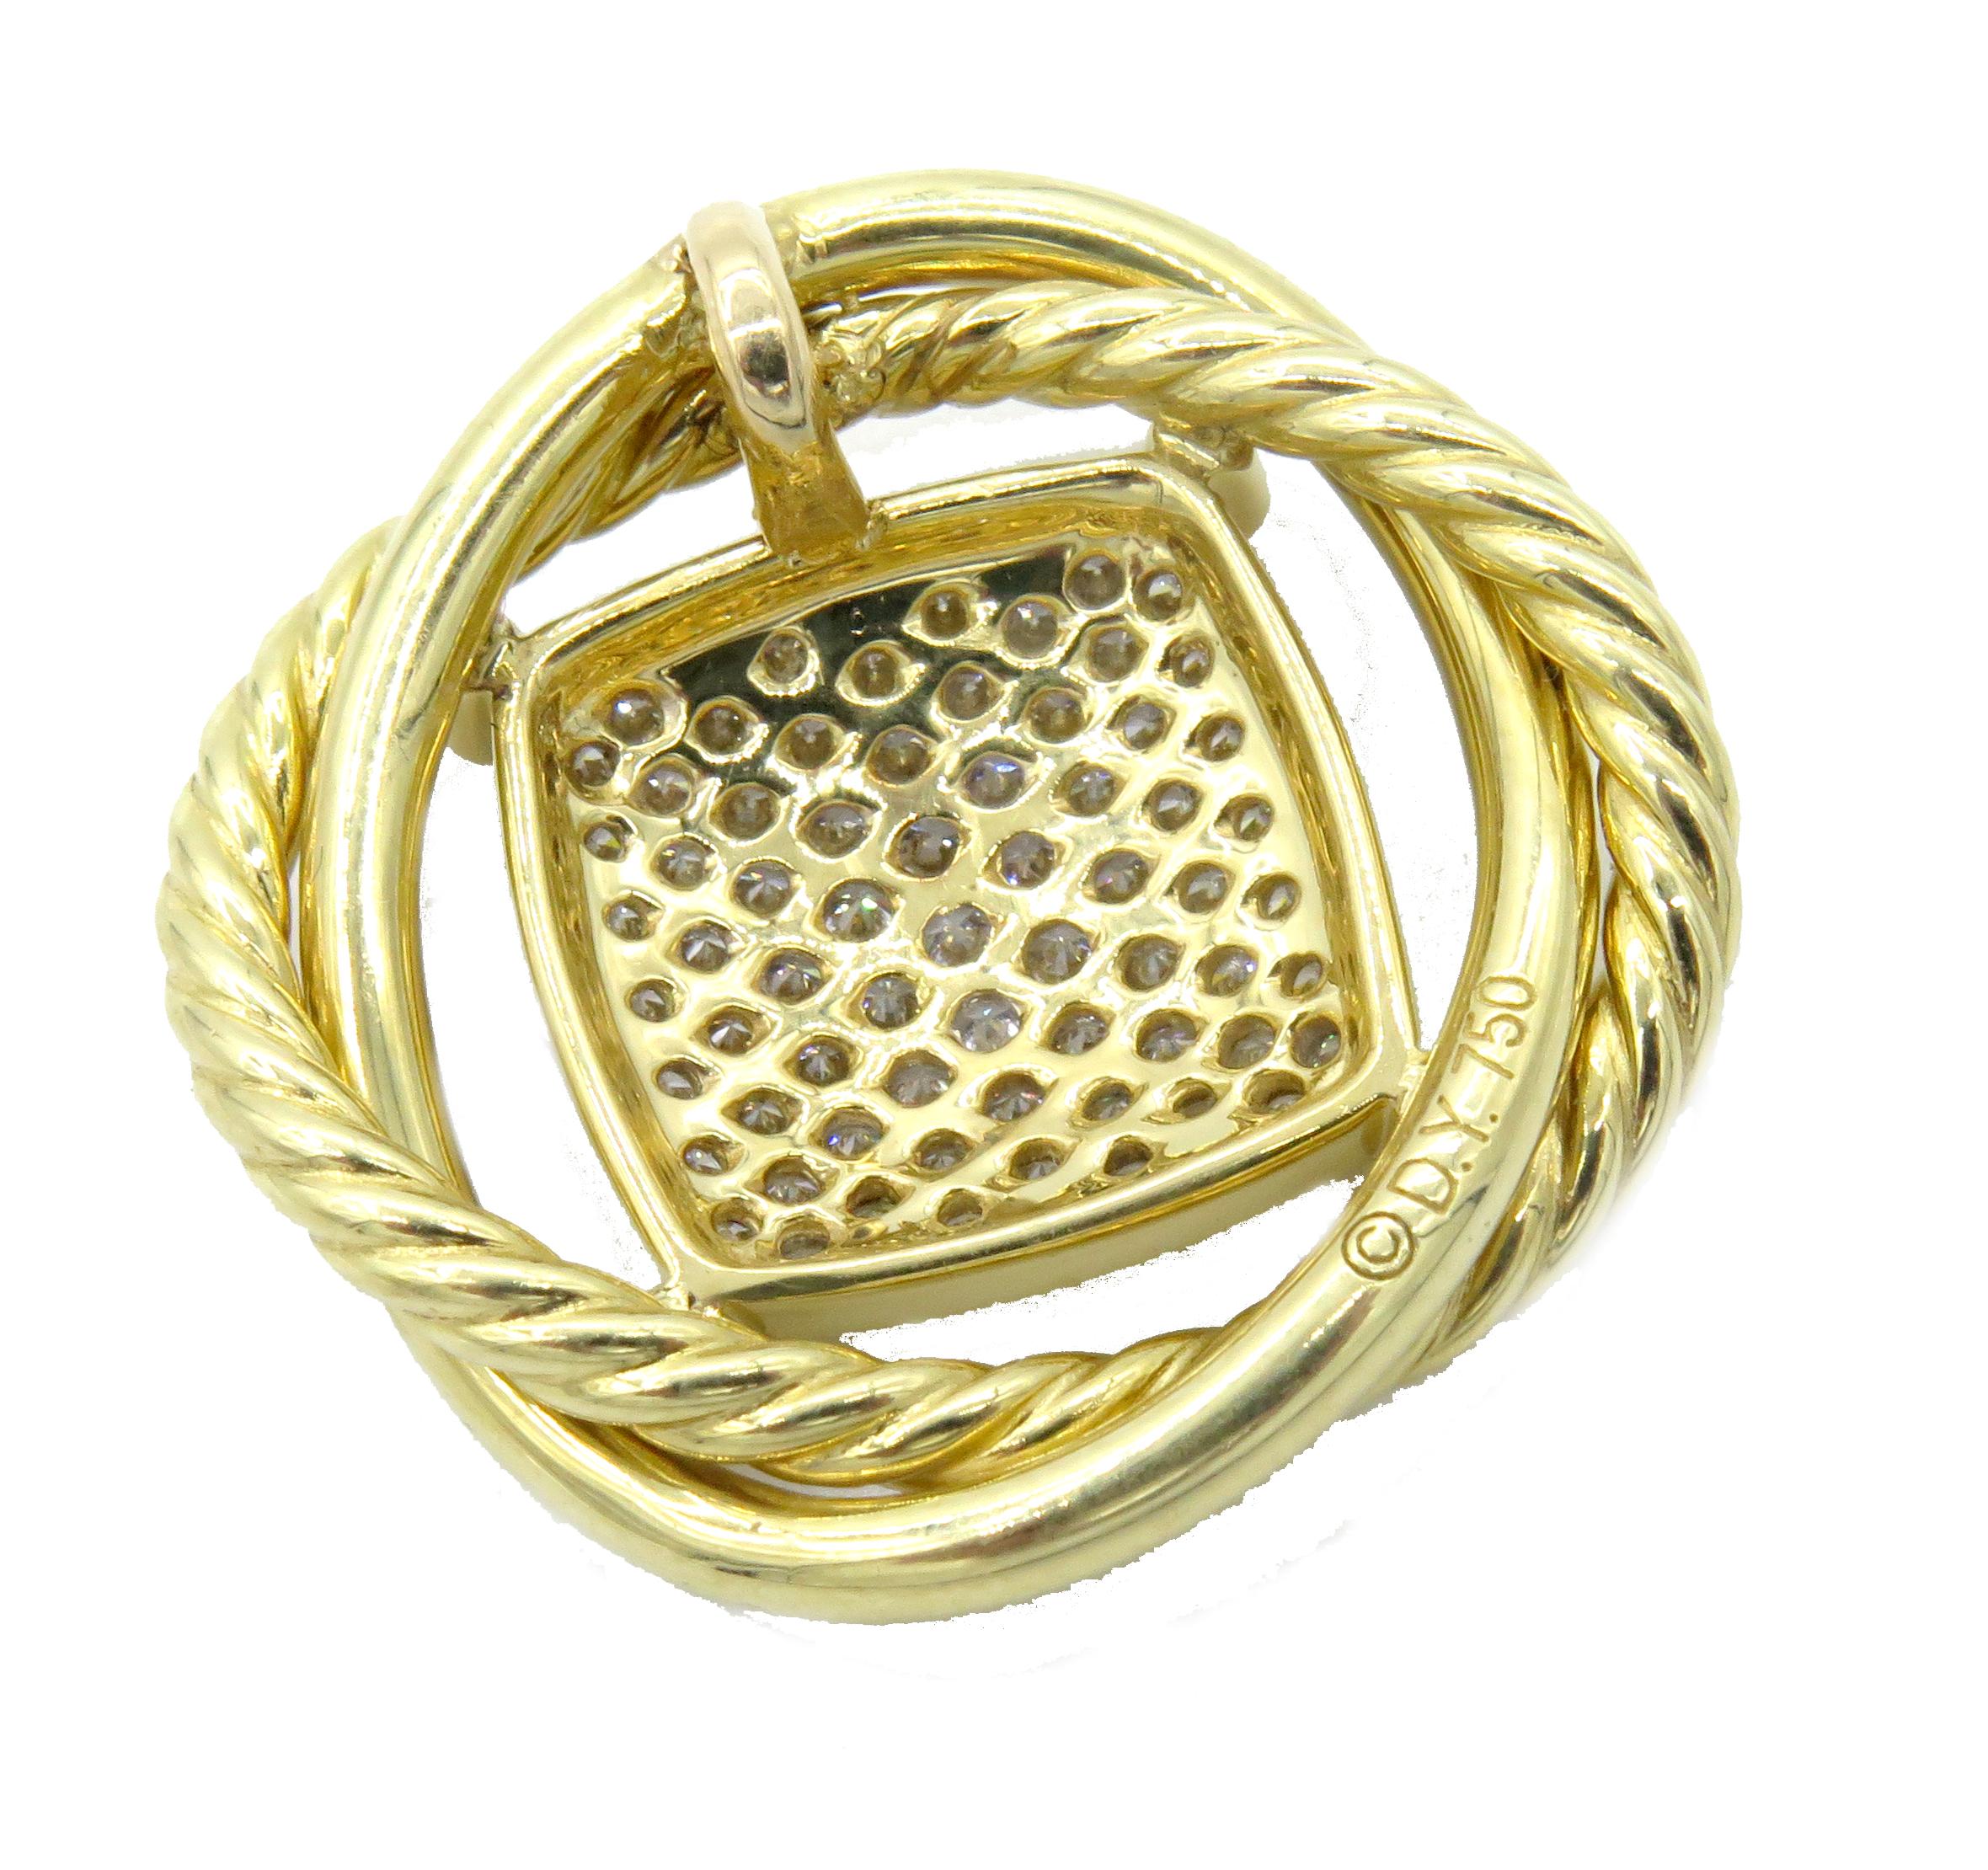 
David Yurman Infinity Diamond Pendant, distinctive style and timeless beauty, A center square covered in 0.46cts of pave diamonds, is set in a 18k yellow gold setting. A part of the Infinity Collection, the pendent measures 0.43 inches by 0.43